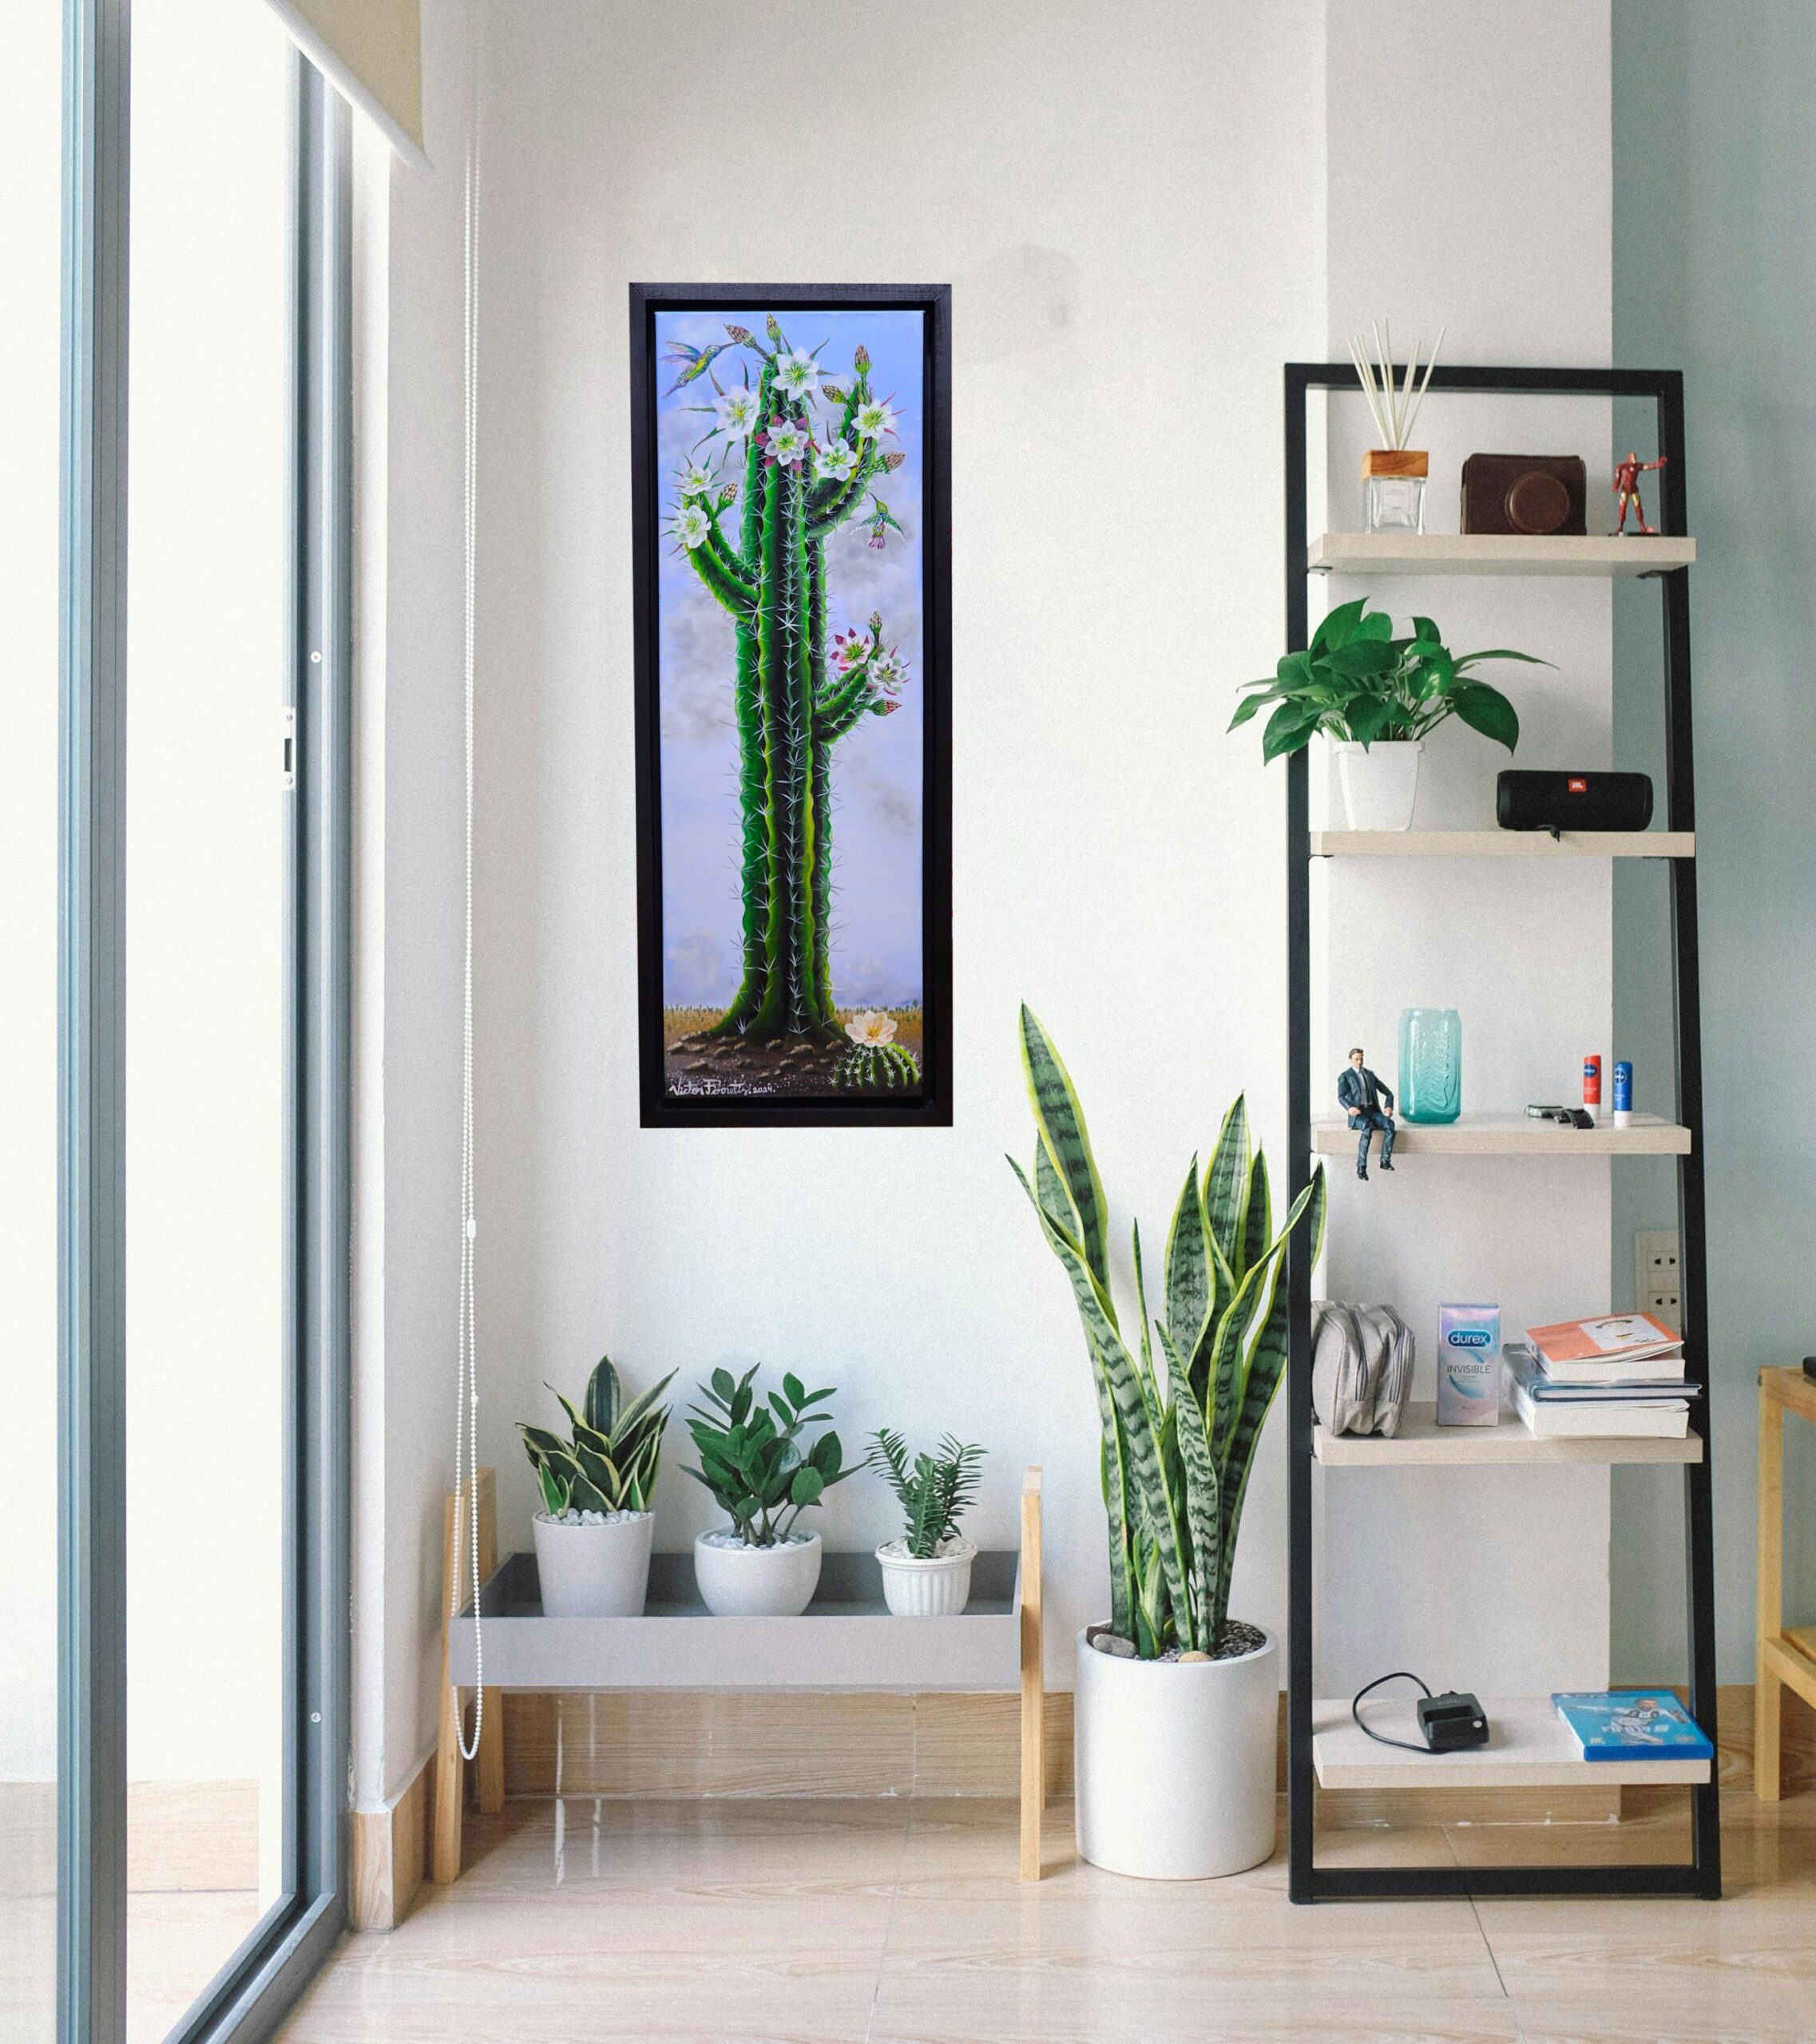 Hummingbirds feeding on a succulent blooming cactus. This work of art has a custom frame handmade with completely resistant, strong poplar wood and is already painted with a uniform black color. The frame already has some D-shaped hooks assembled, ready to hang in your beautiful home.